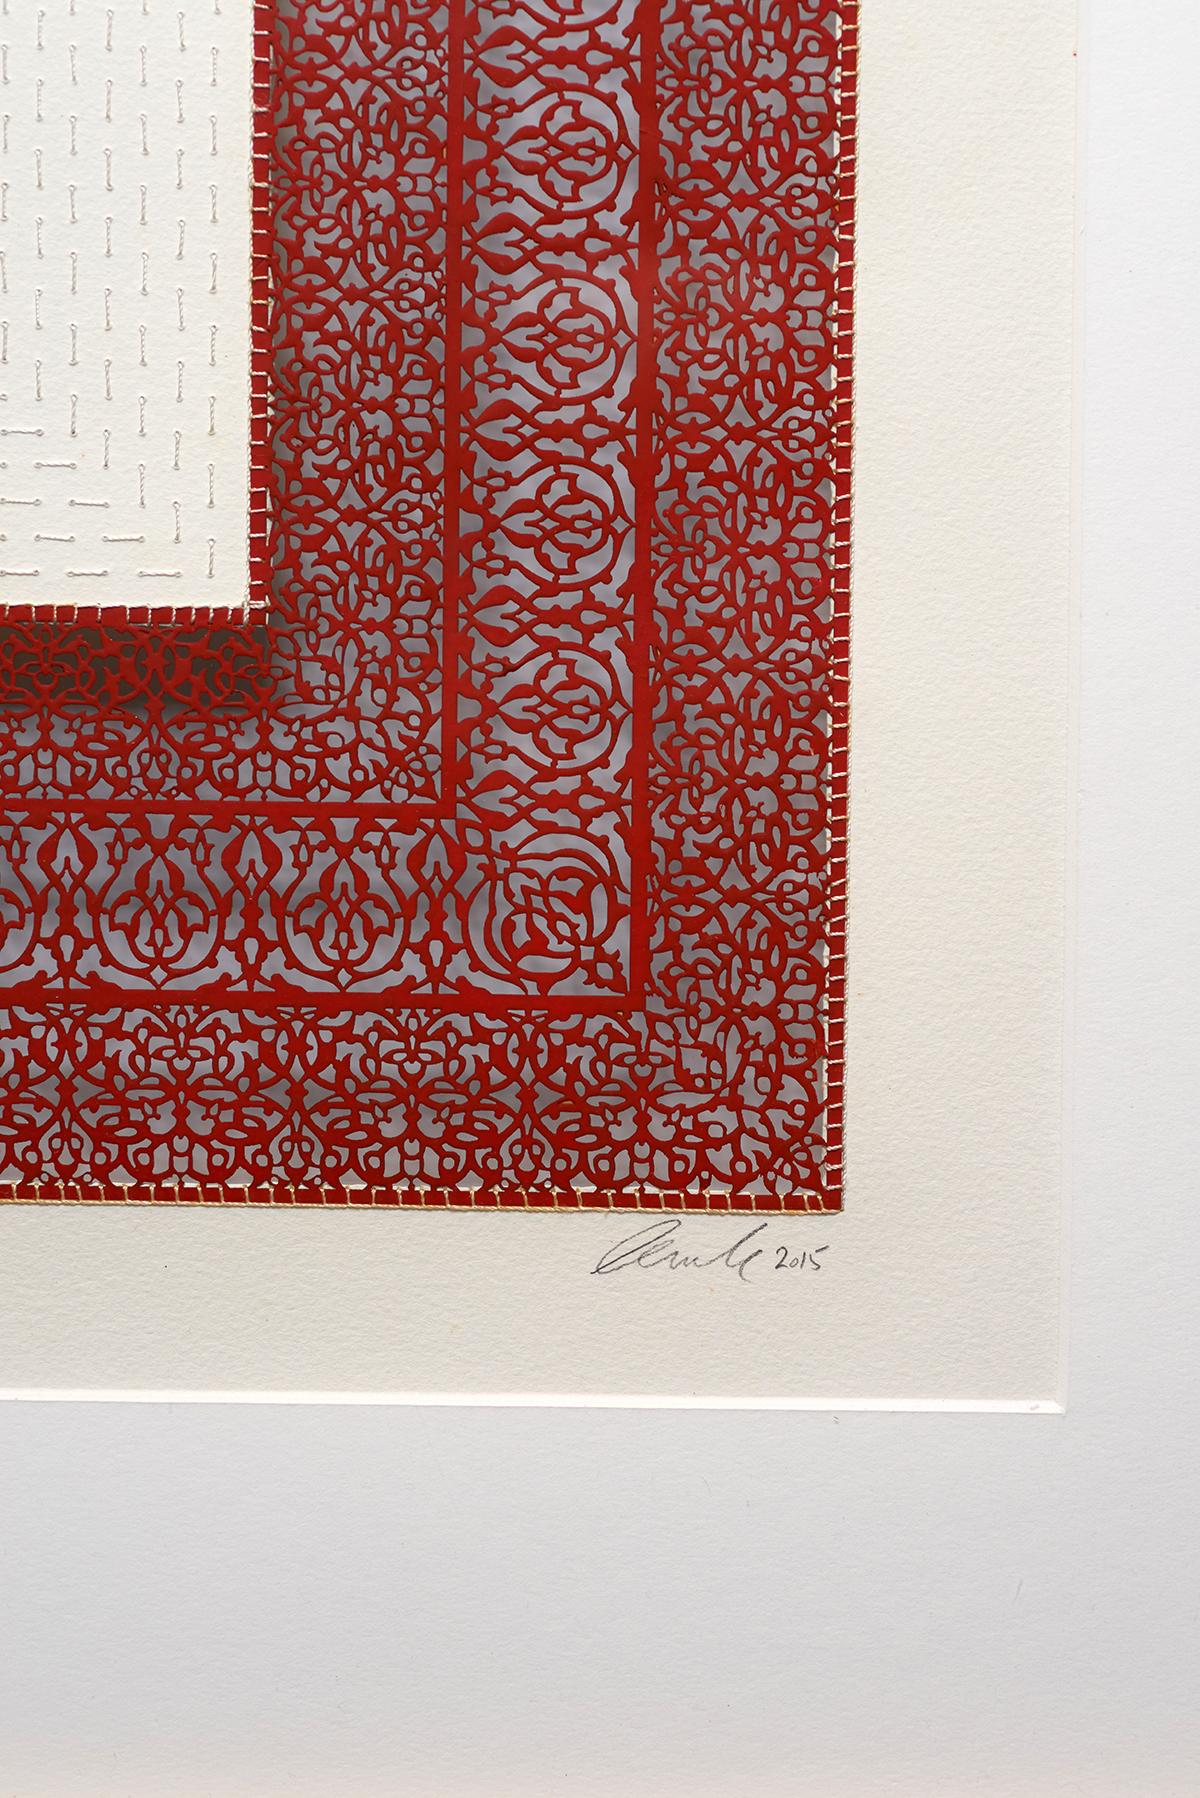 Laser-cut encaustic red burgundy floral embroidery on paper - Painting by Anila Quayyum Agha